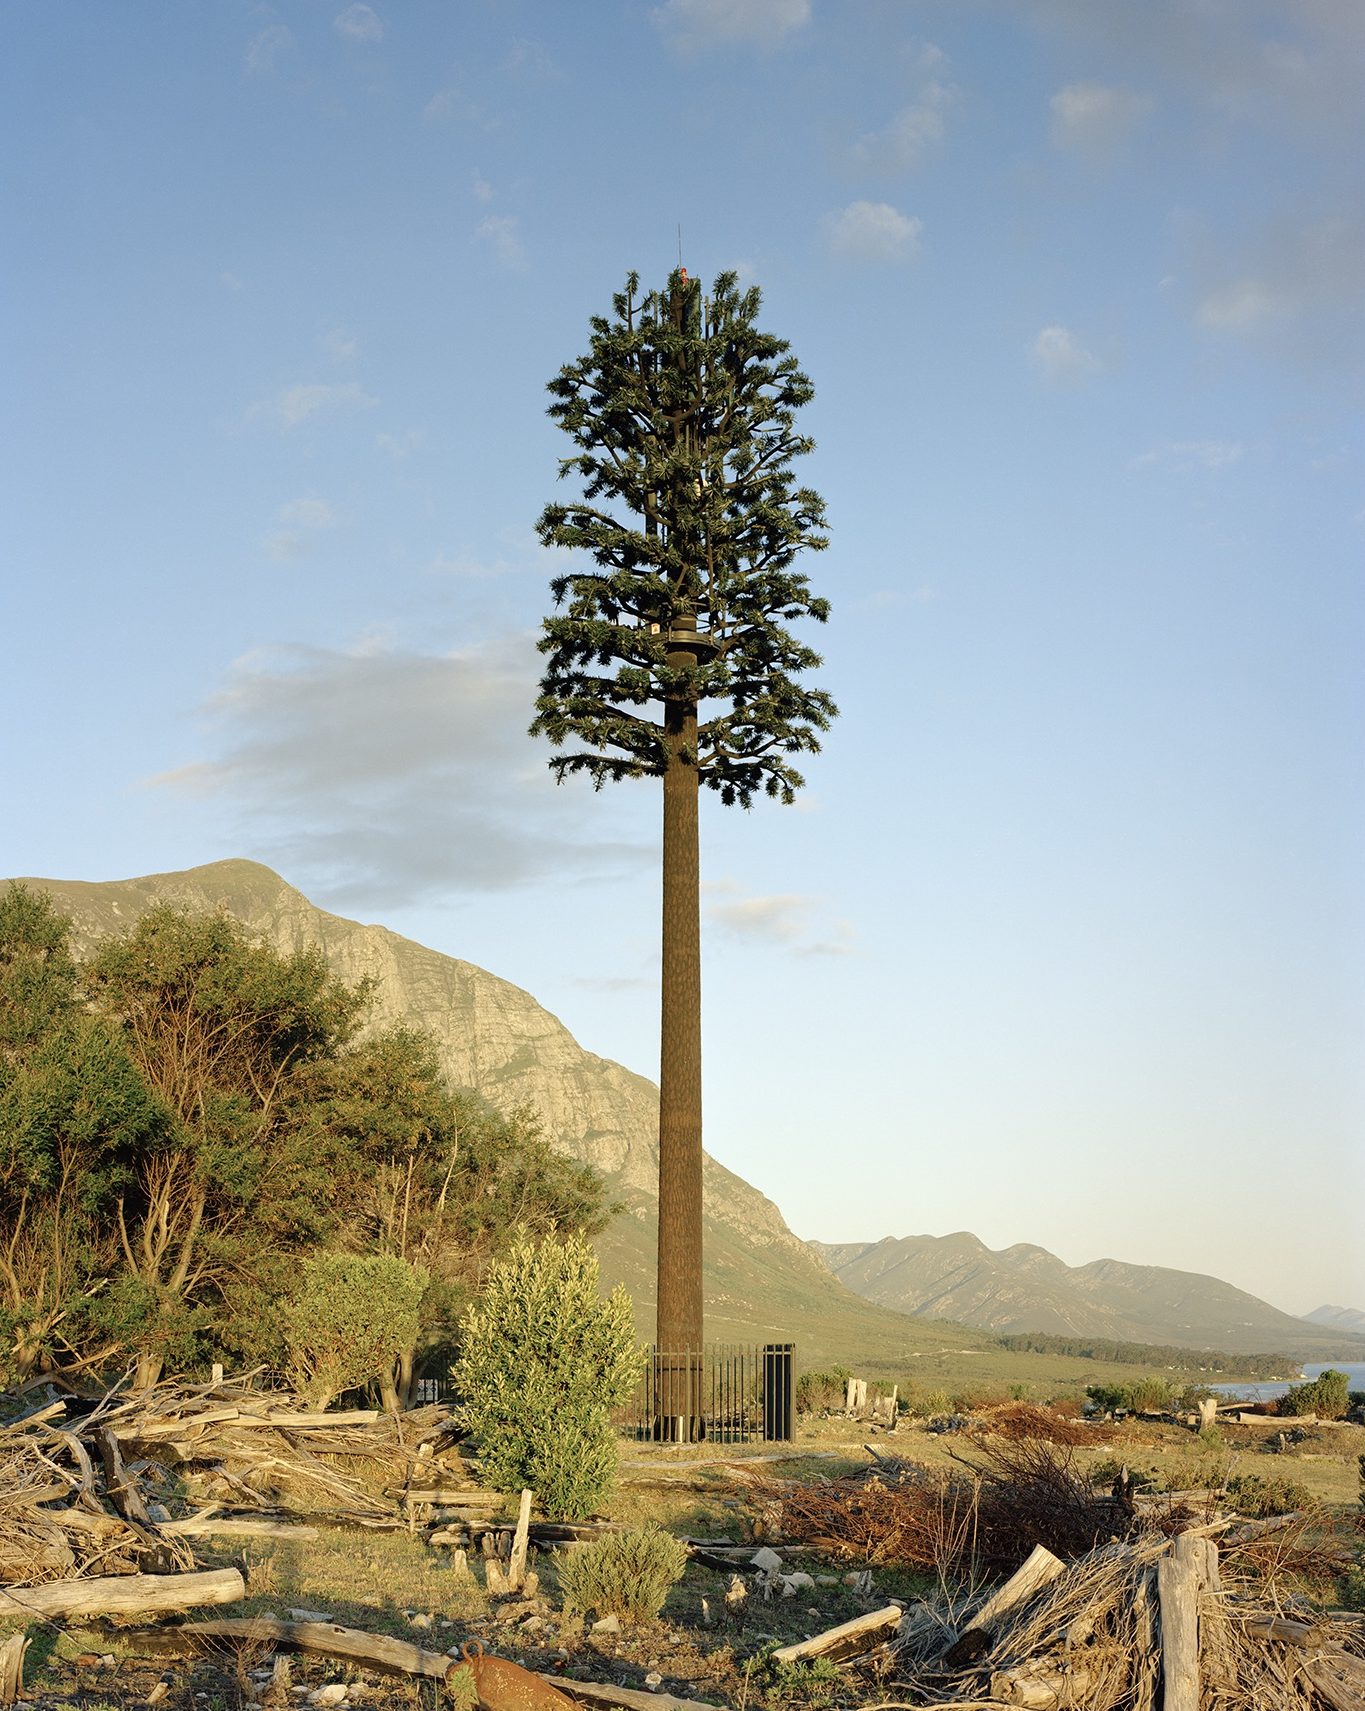 Very tall pine tree in a mountainous landscape with lots of wood on the ground.